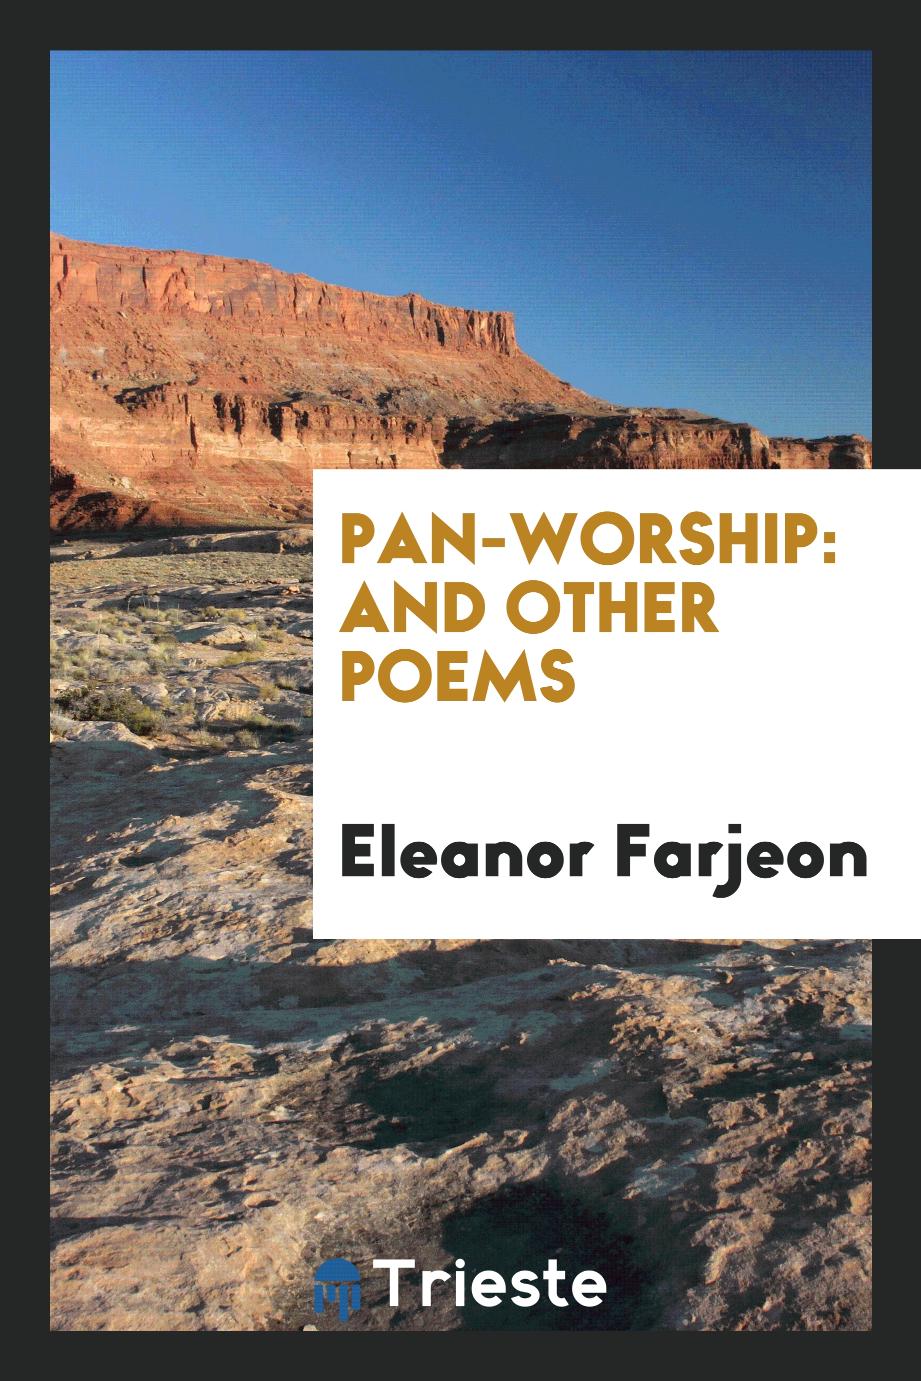 Pan-worship: And Other Poems